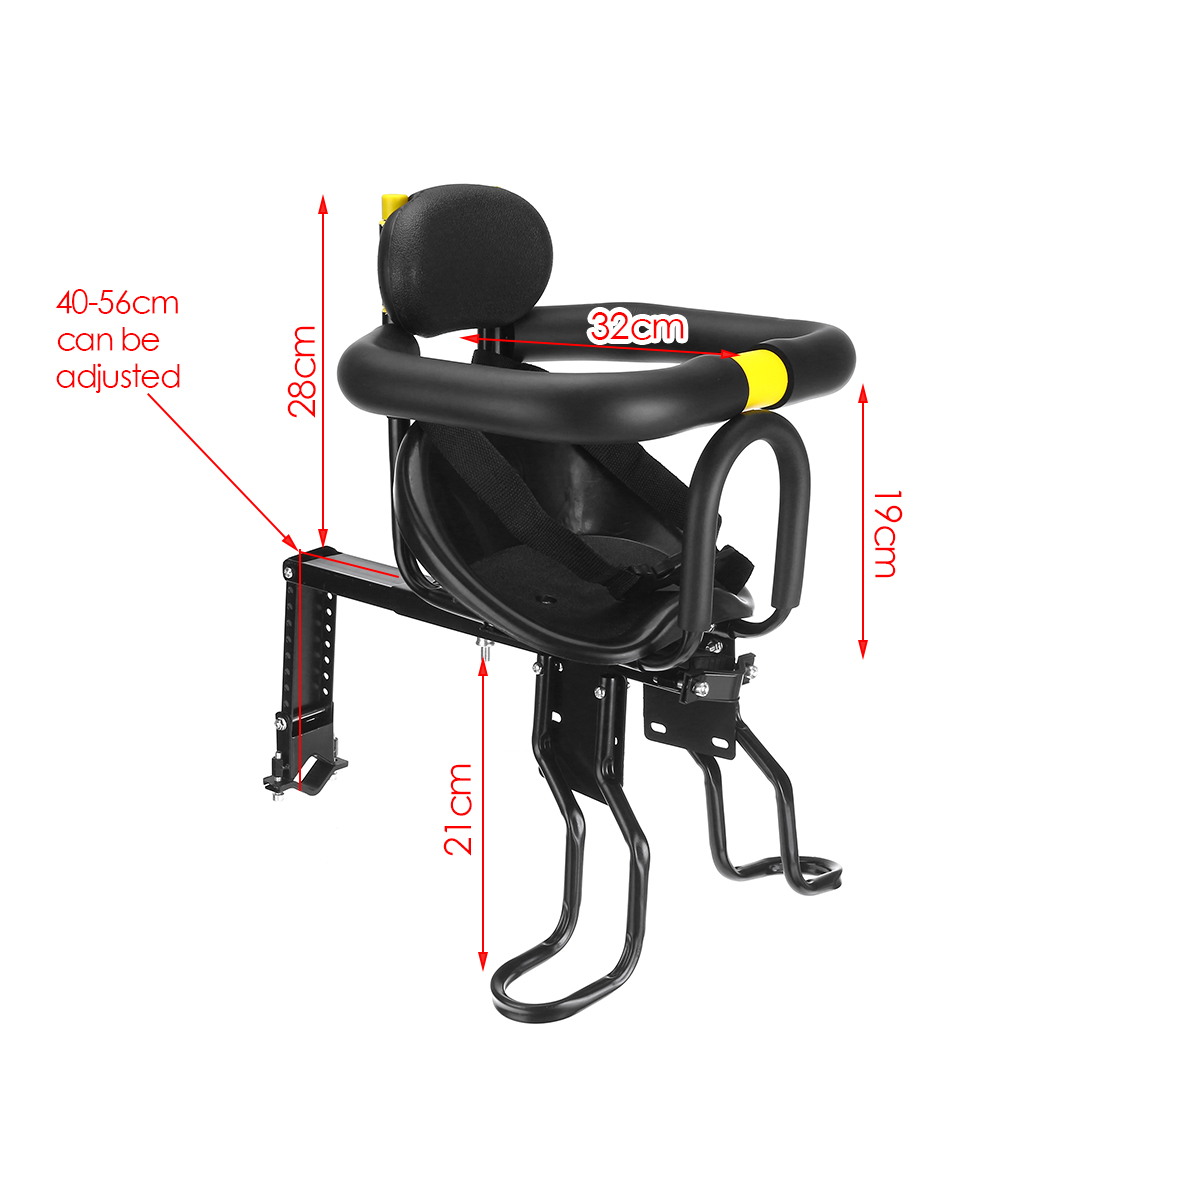 Folding-Child-Bicycle-Safety-Seat-Mountain-Road-Bike-Front-Chair-Saddle-Kids-Soft-Cushion-1781521-3